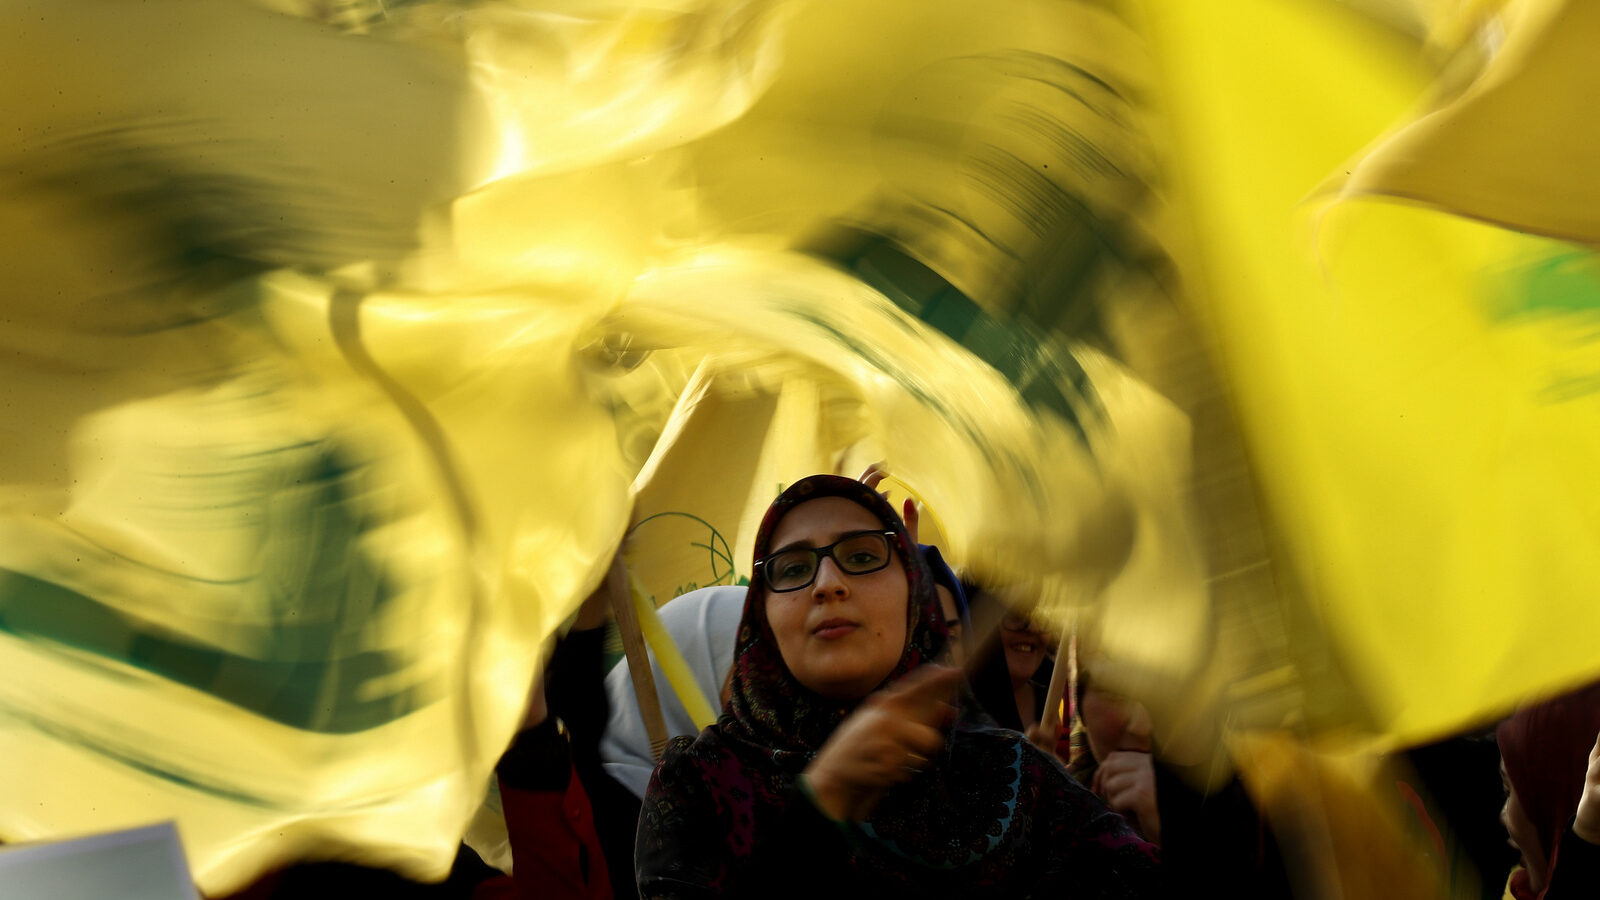 A Hezbollah supporter waves her group flags during an election campaign speech by Hezbollah leader Sayyed Hassan Nasrallah, in a southern suburb of Beirut, Lebanon, April 13, 2018. (AP/Hussein Malla)